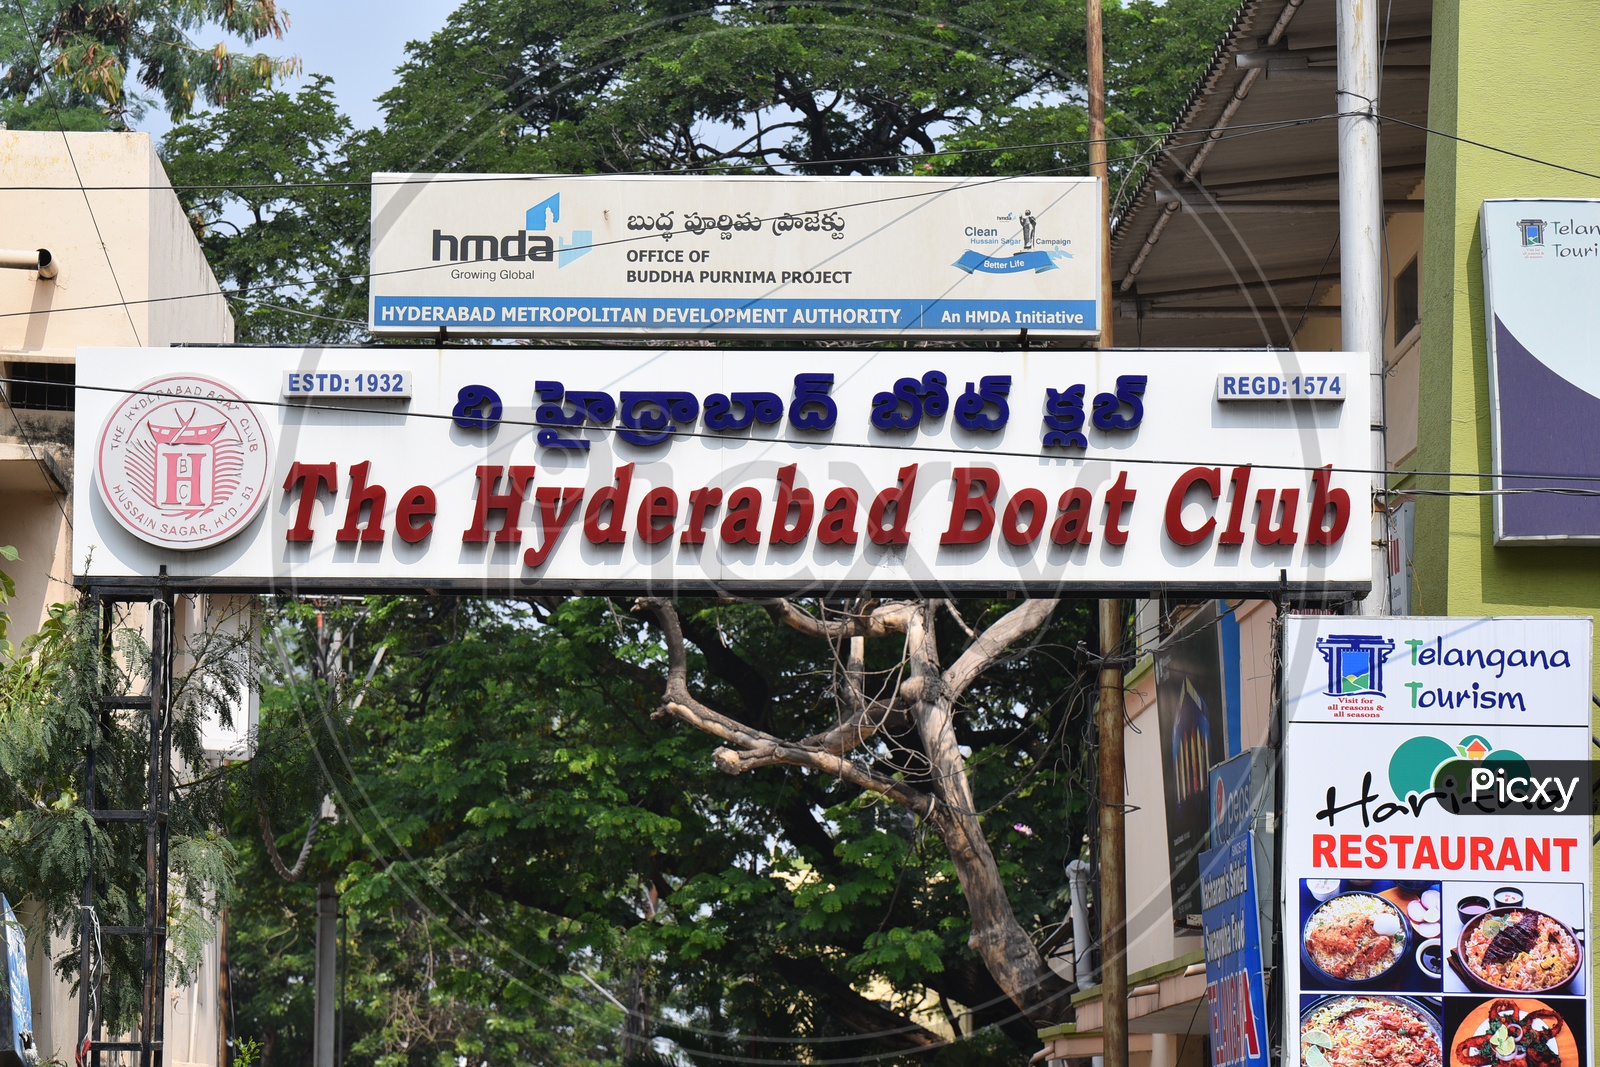 The Hyderabad Boat Club Name Board At Tank Bund in Hyderabad